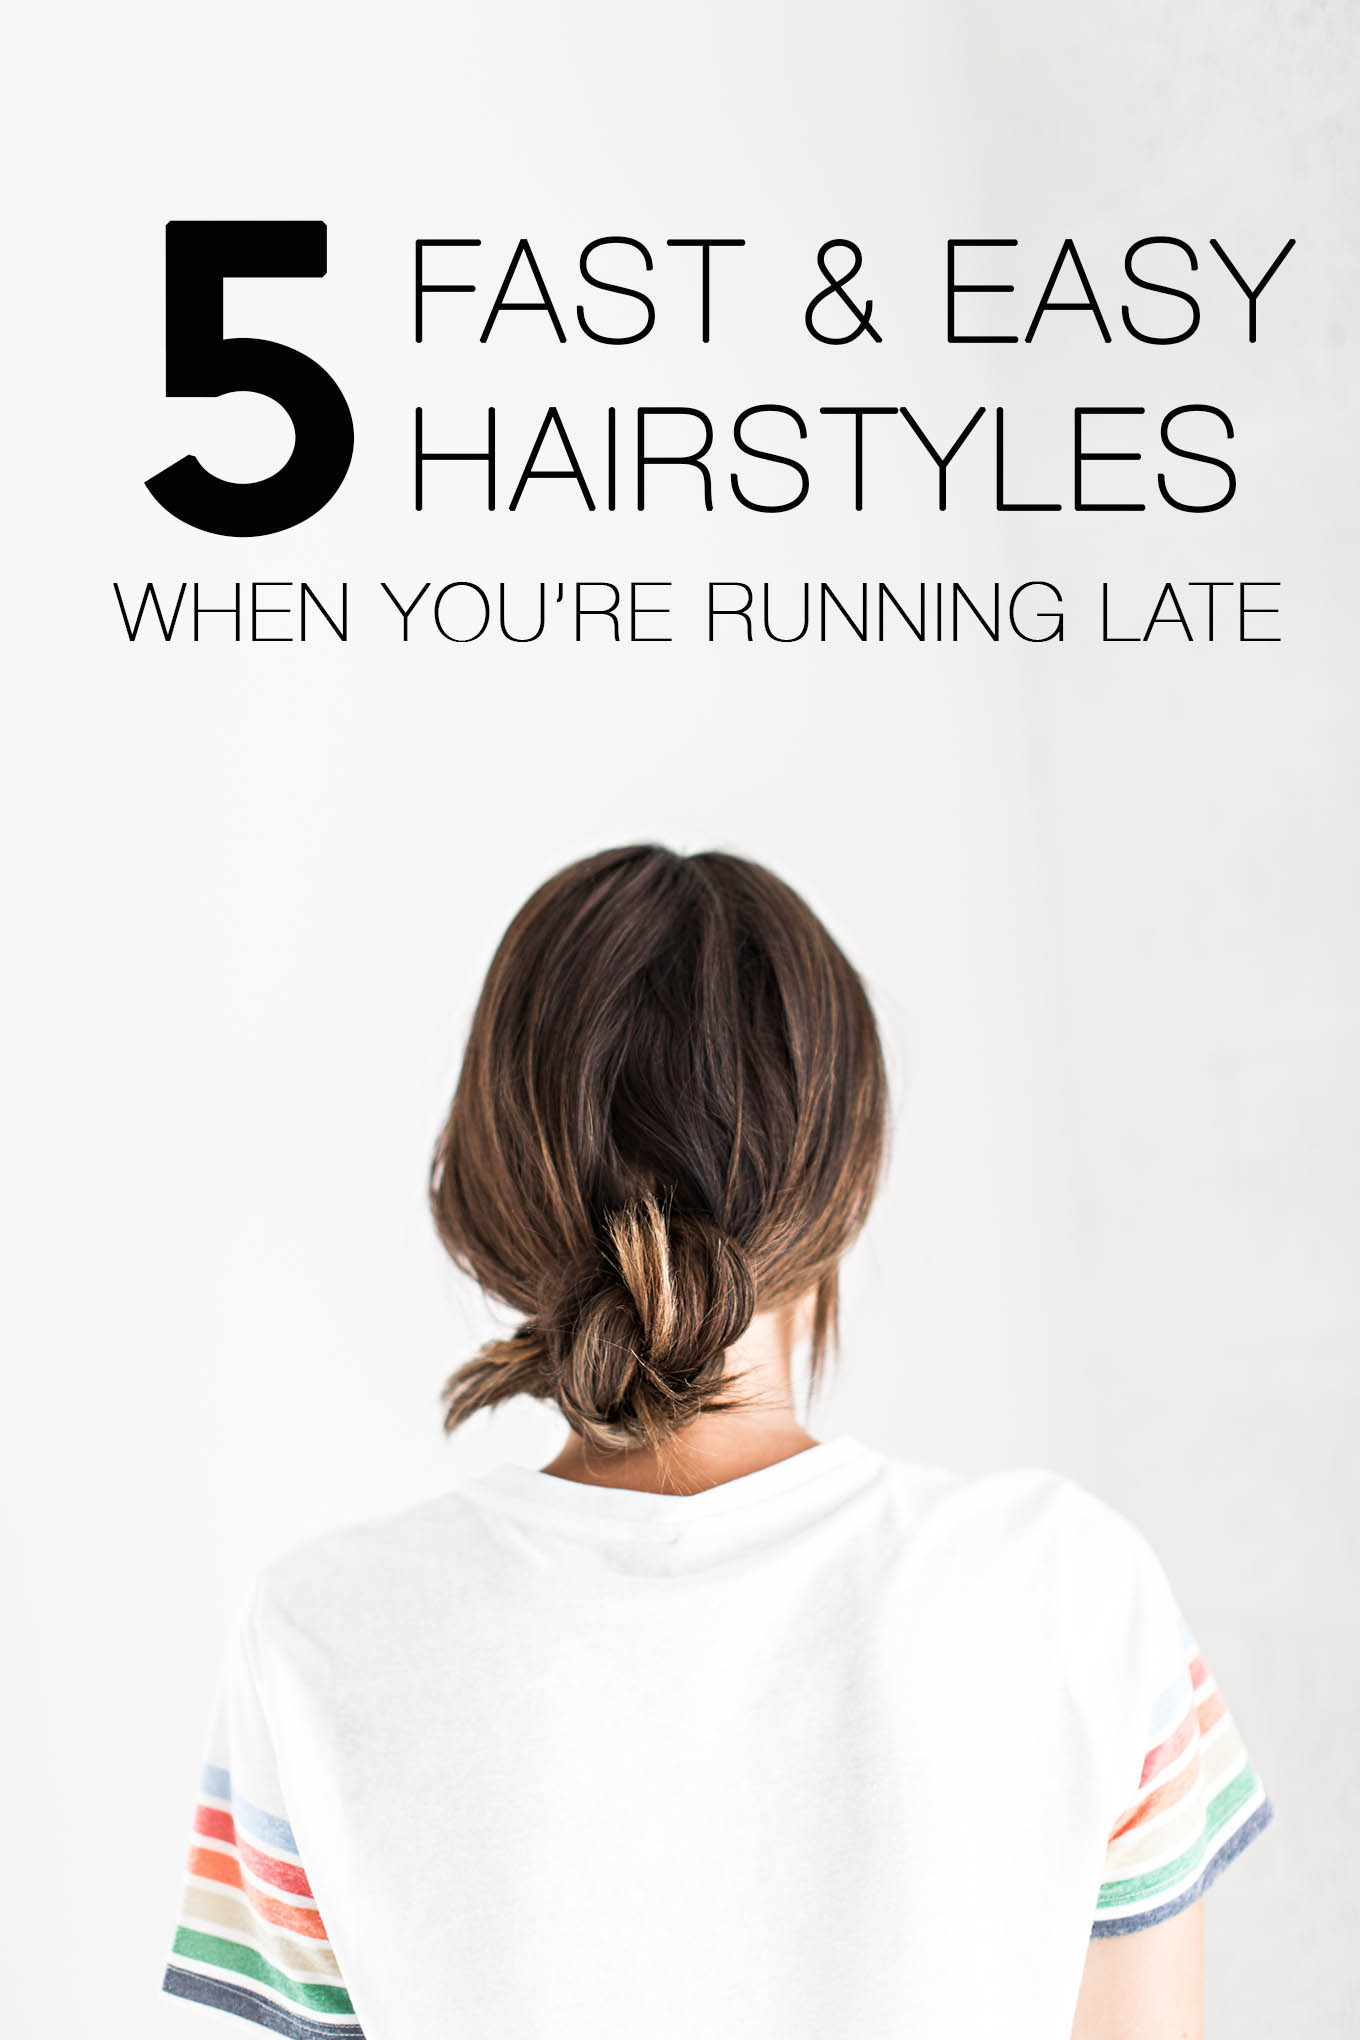 5 fast and easy hairstyles